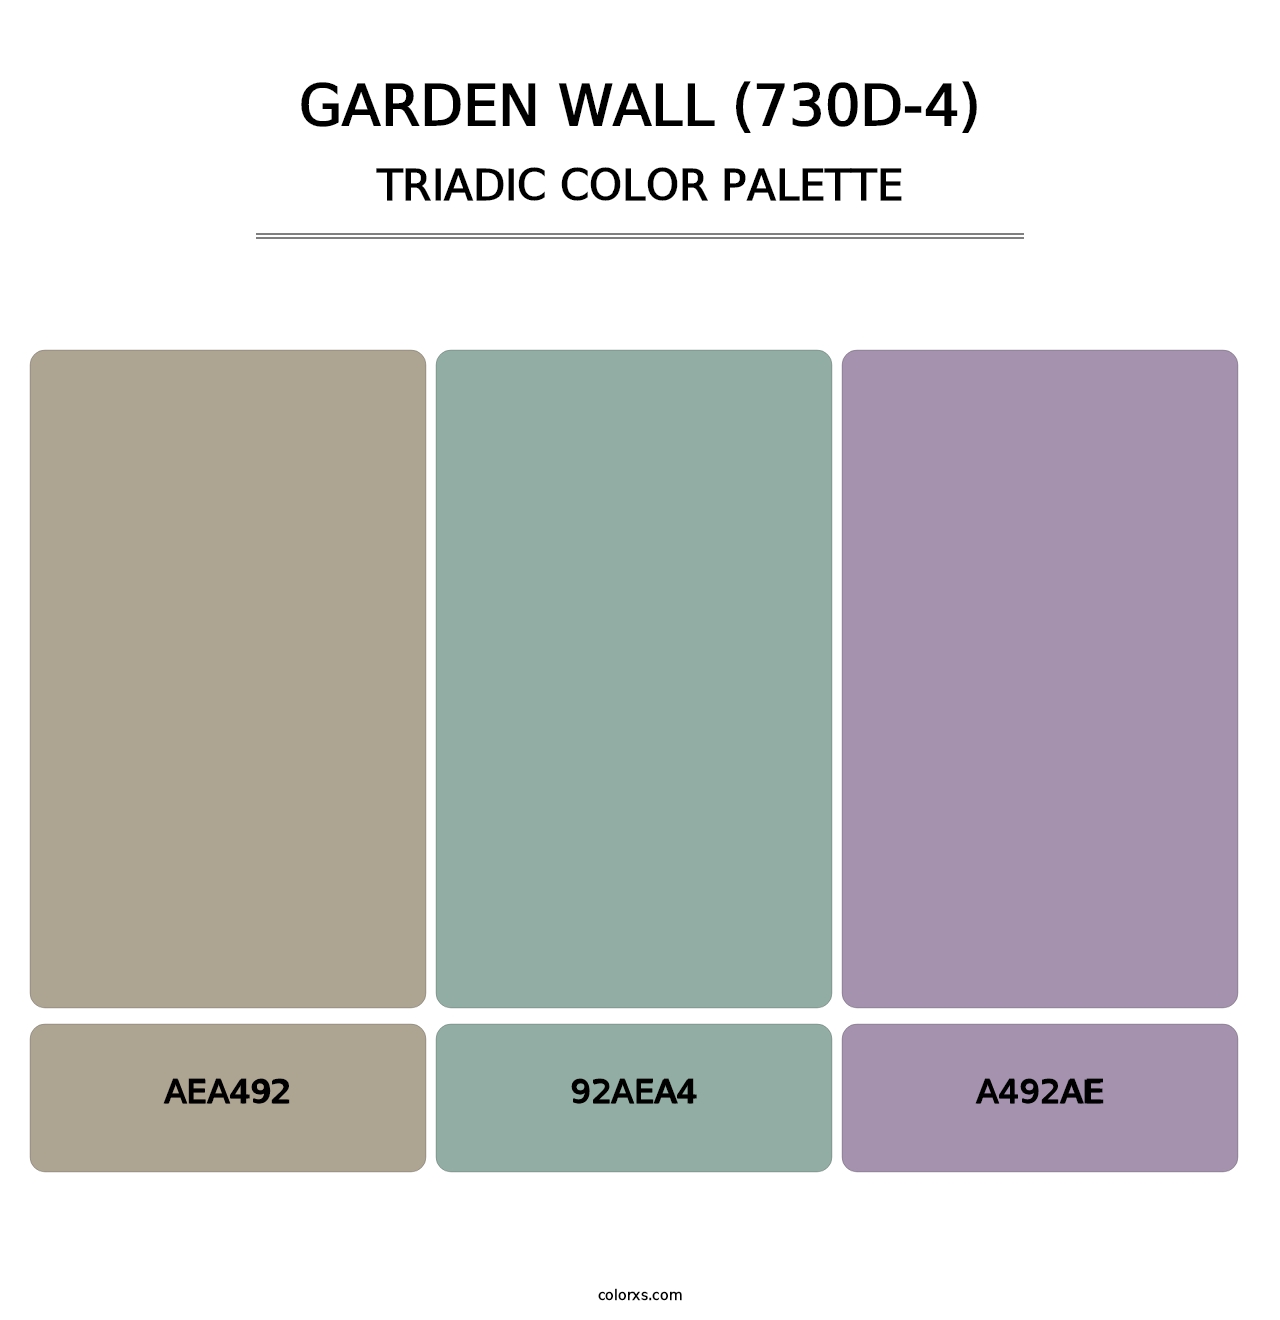 Garden Wall (730D-4) - Triadic Color Palette